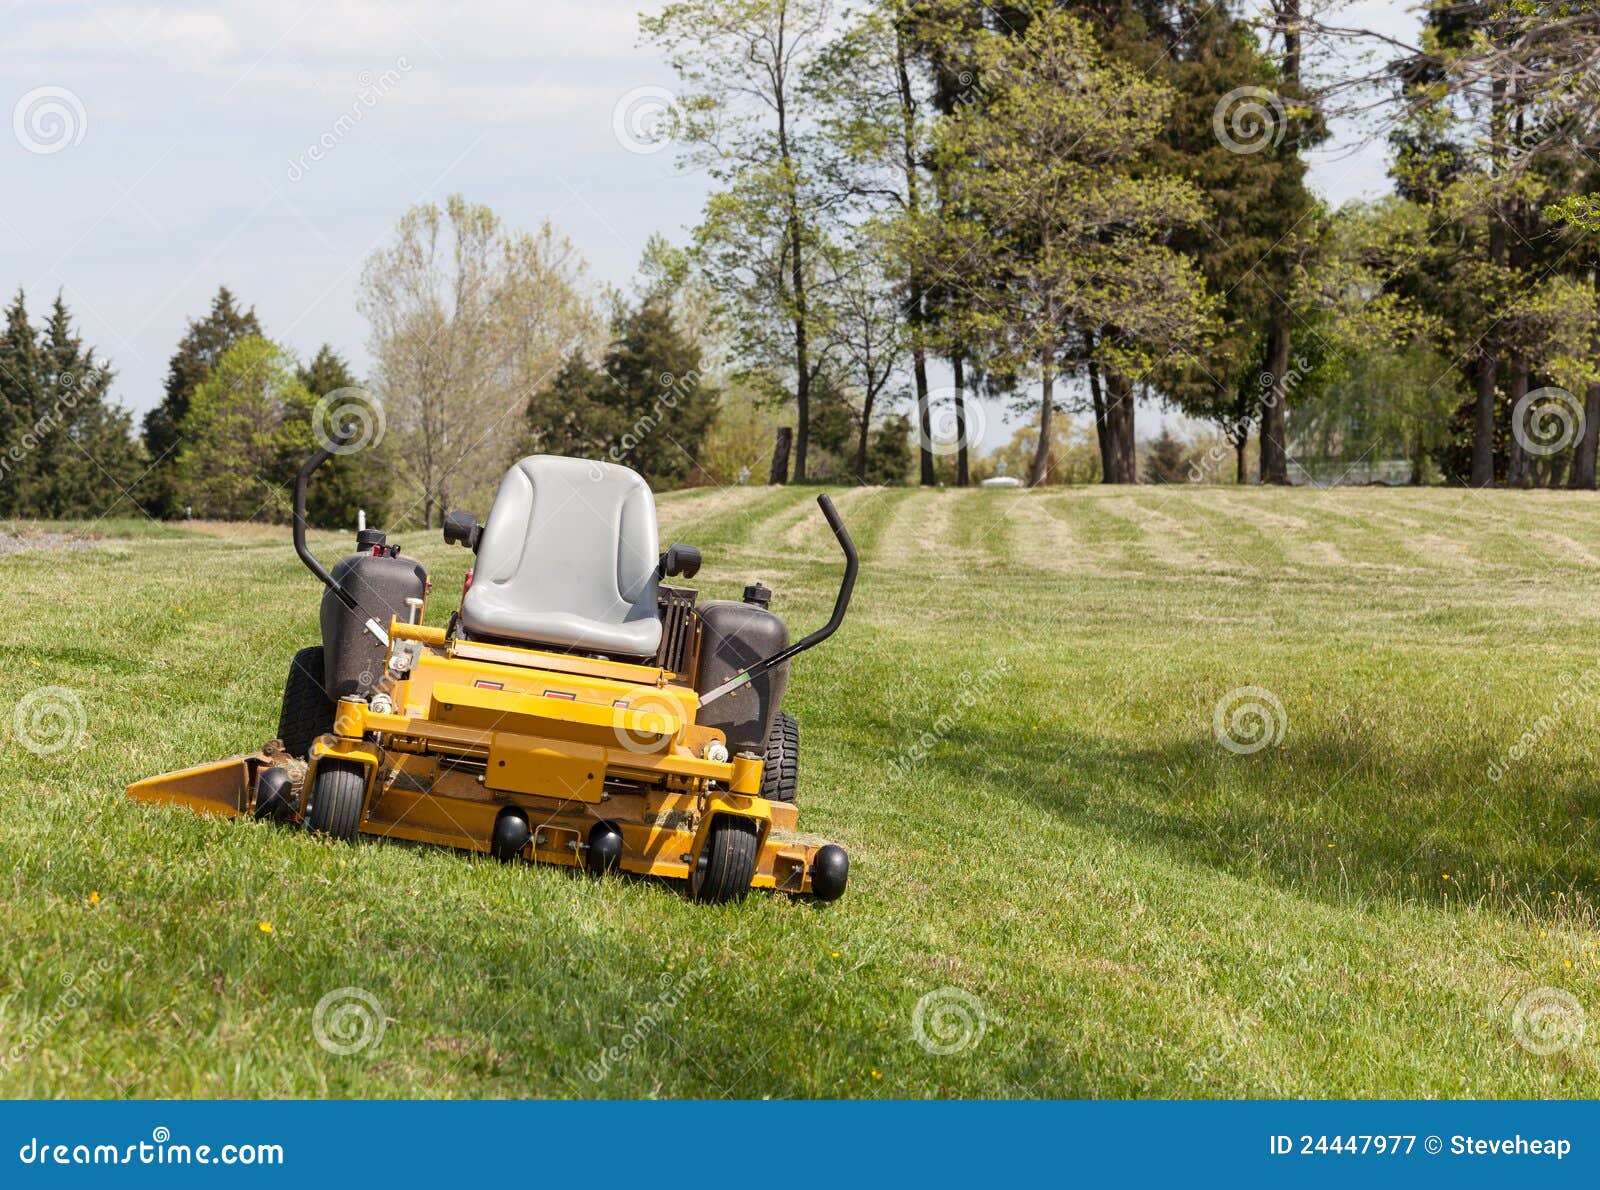 zero turn lawn mower on turf with no driver